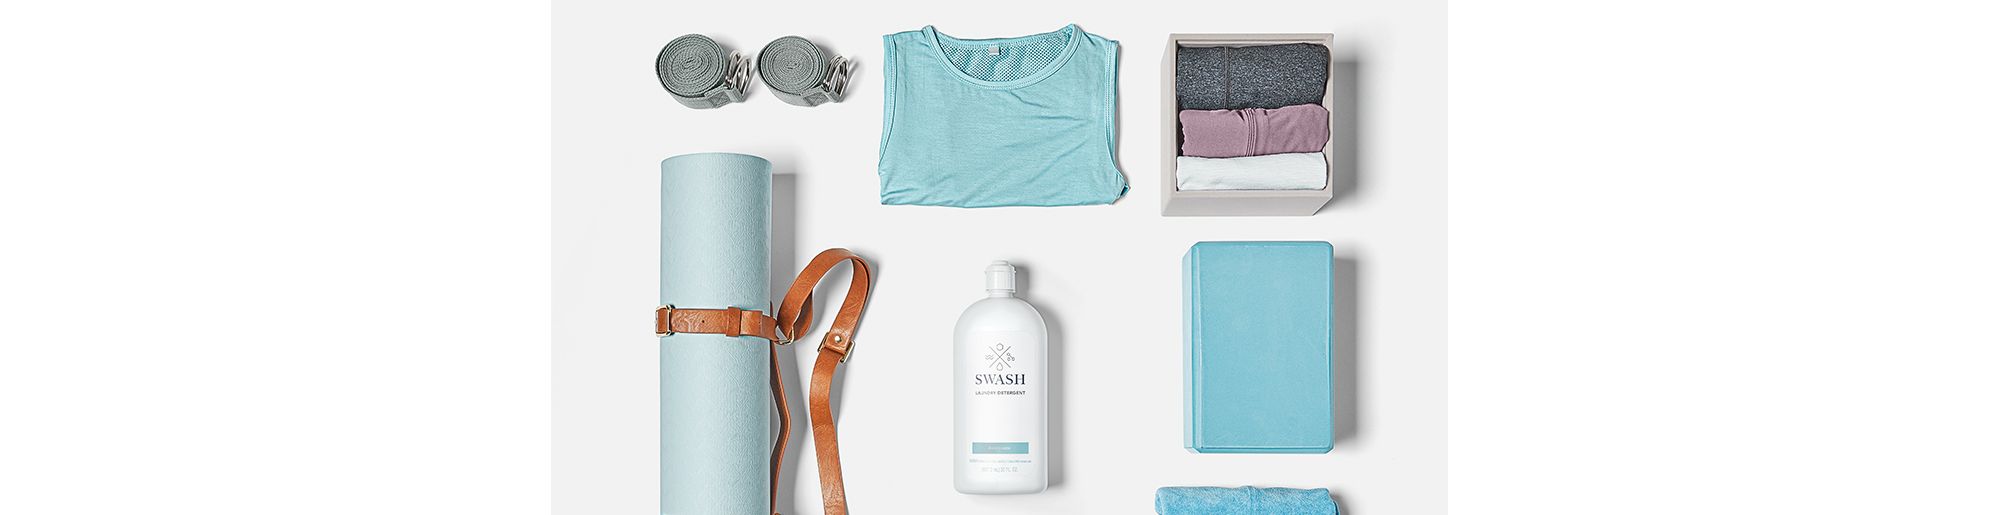 Sets of folded workout clothes and workout gear surround a bottle of Swash laundry detergent.